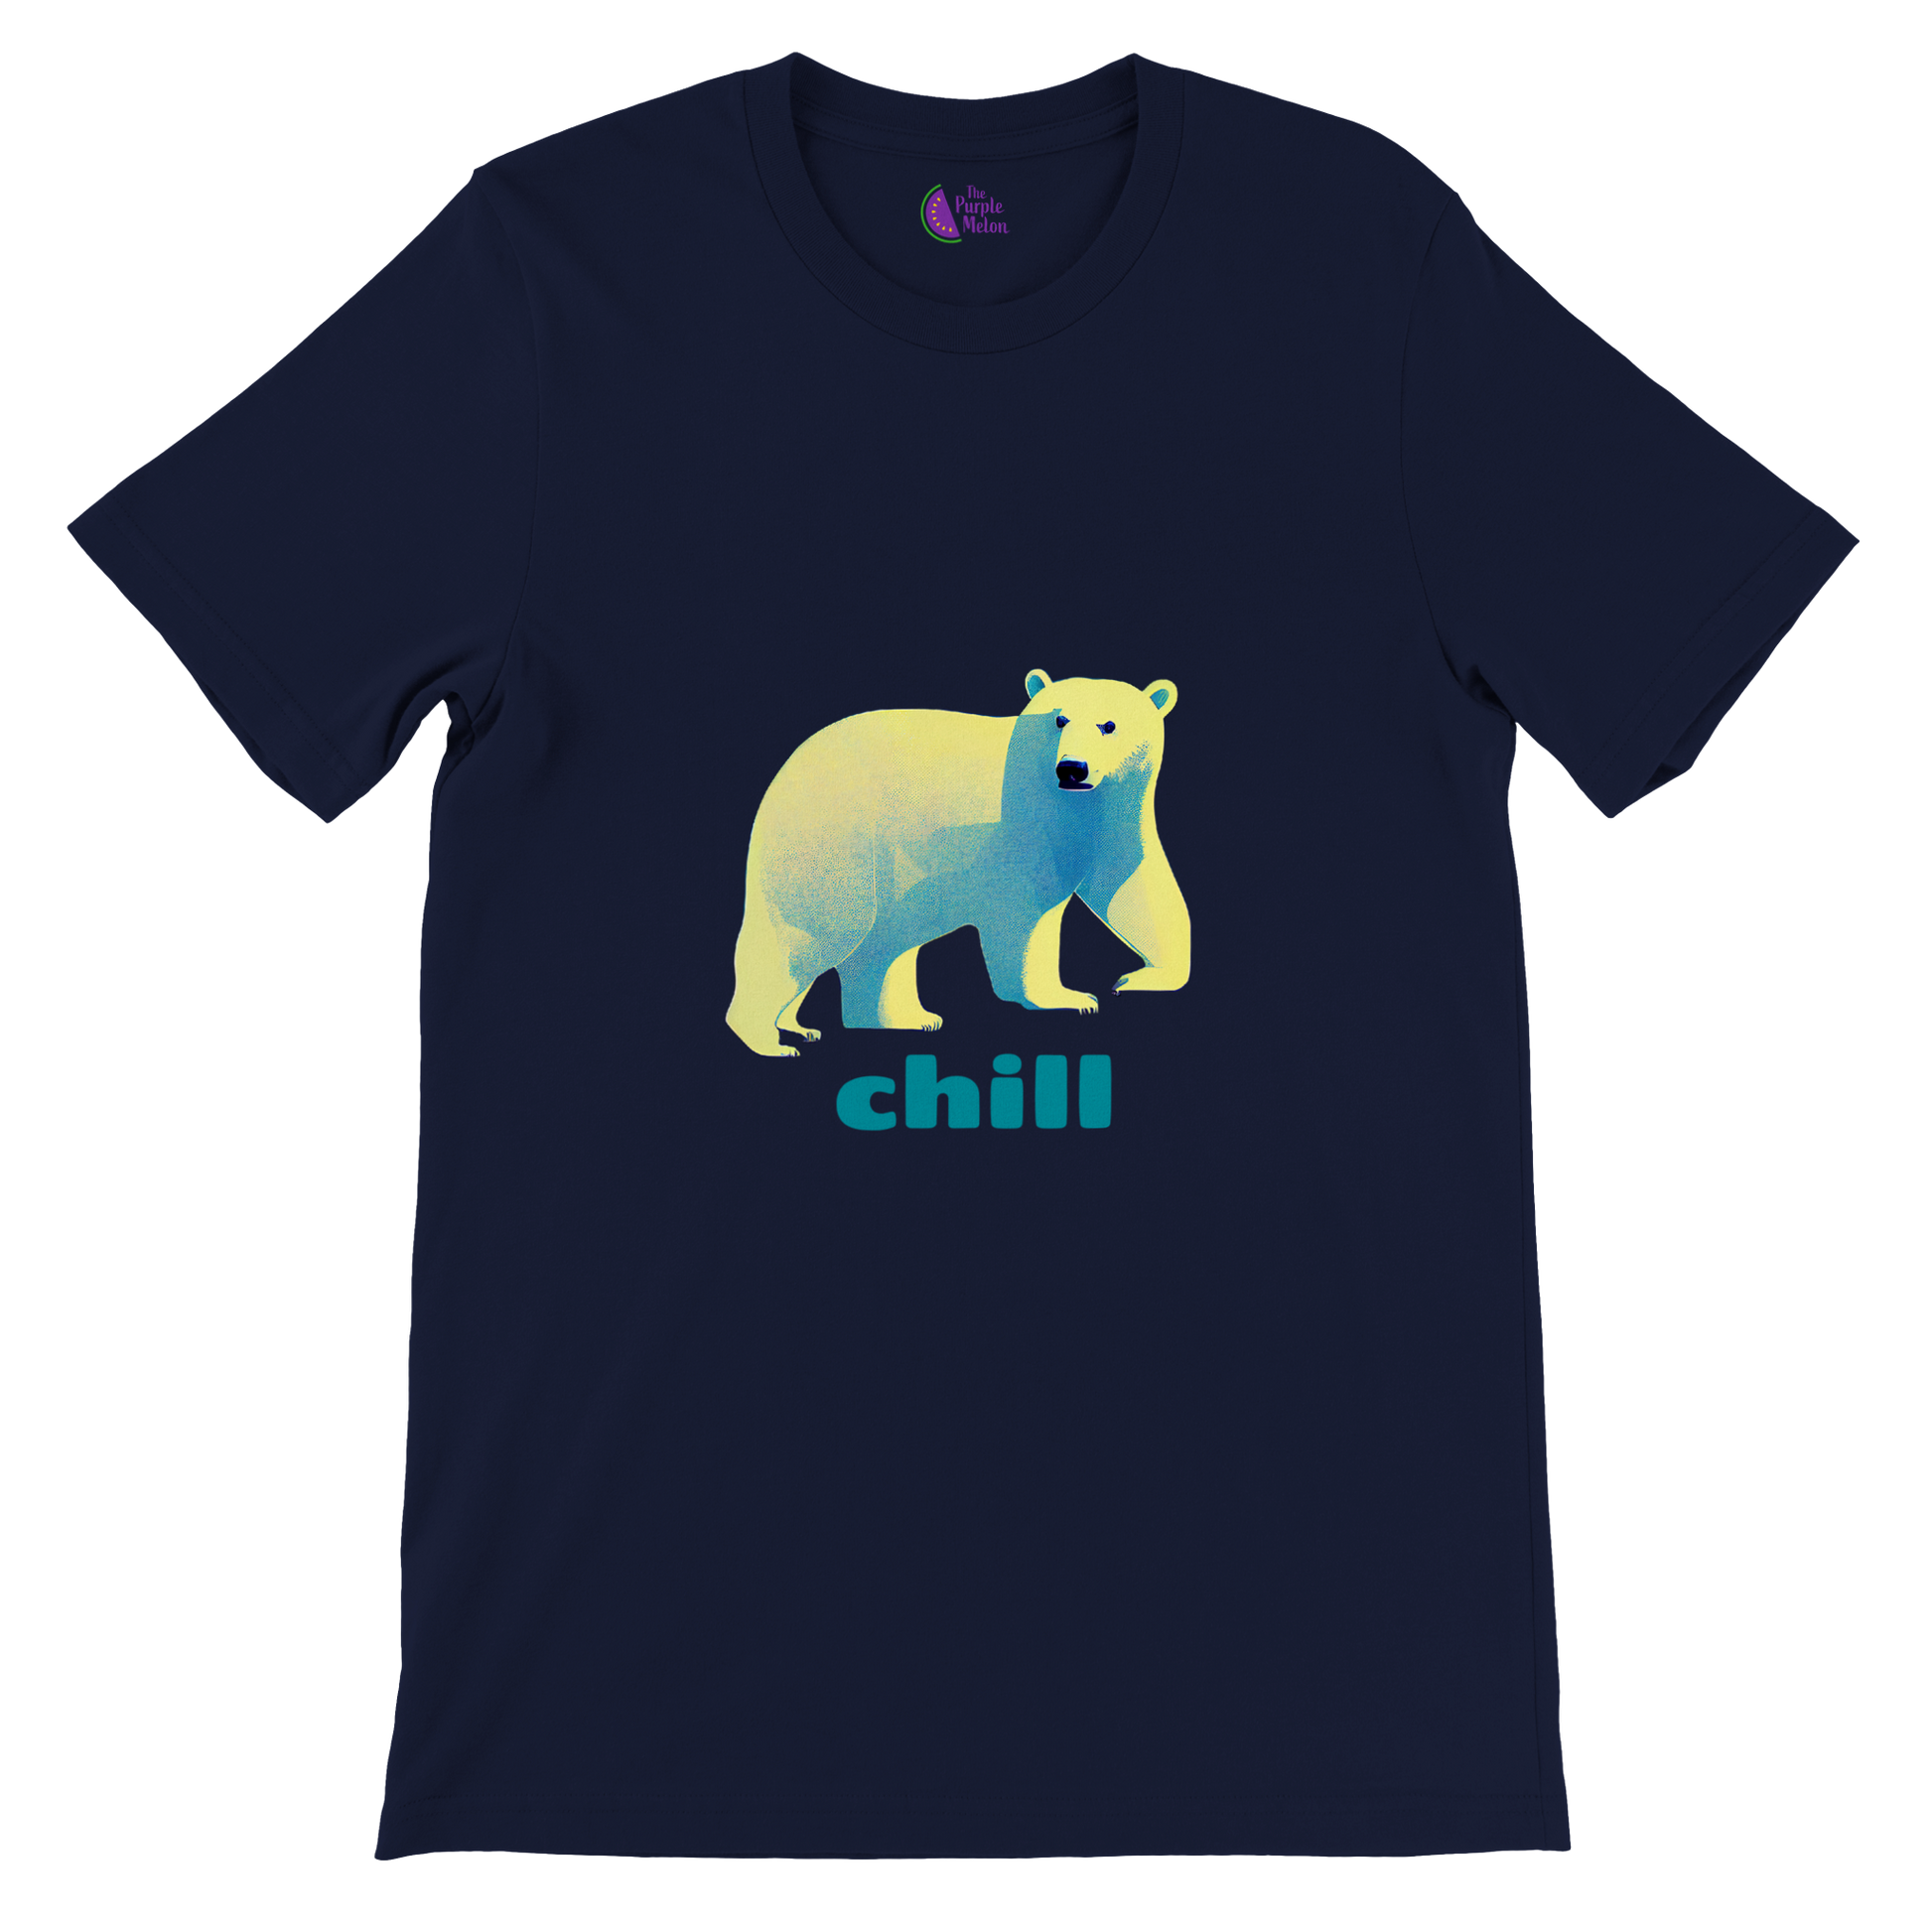 Navy t-shirt with a polar bear print with chill caption